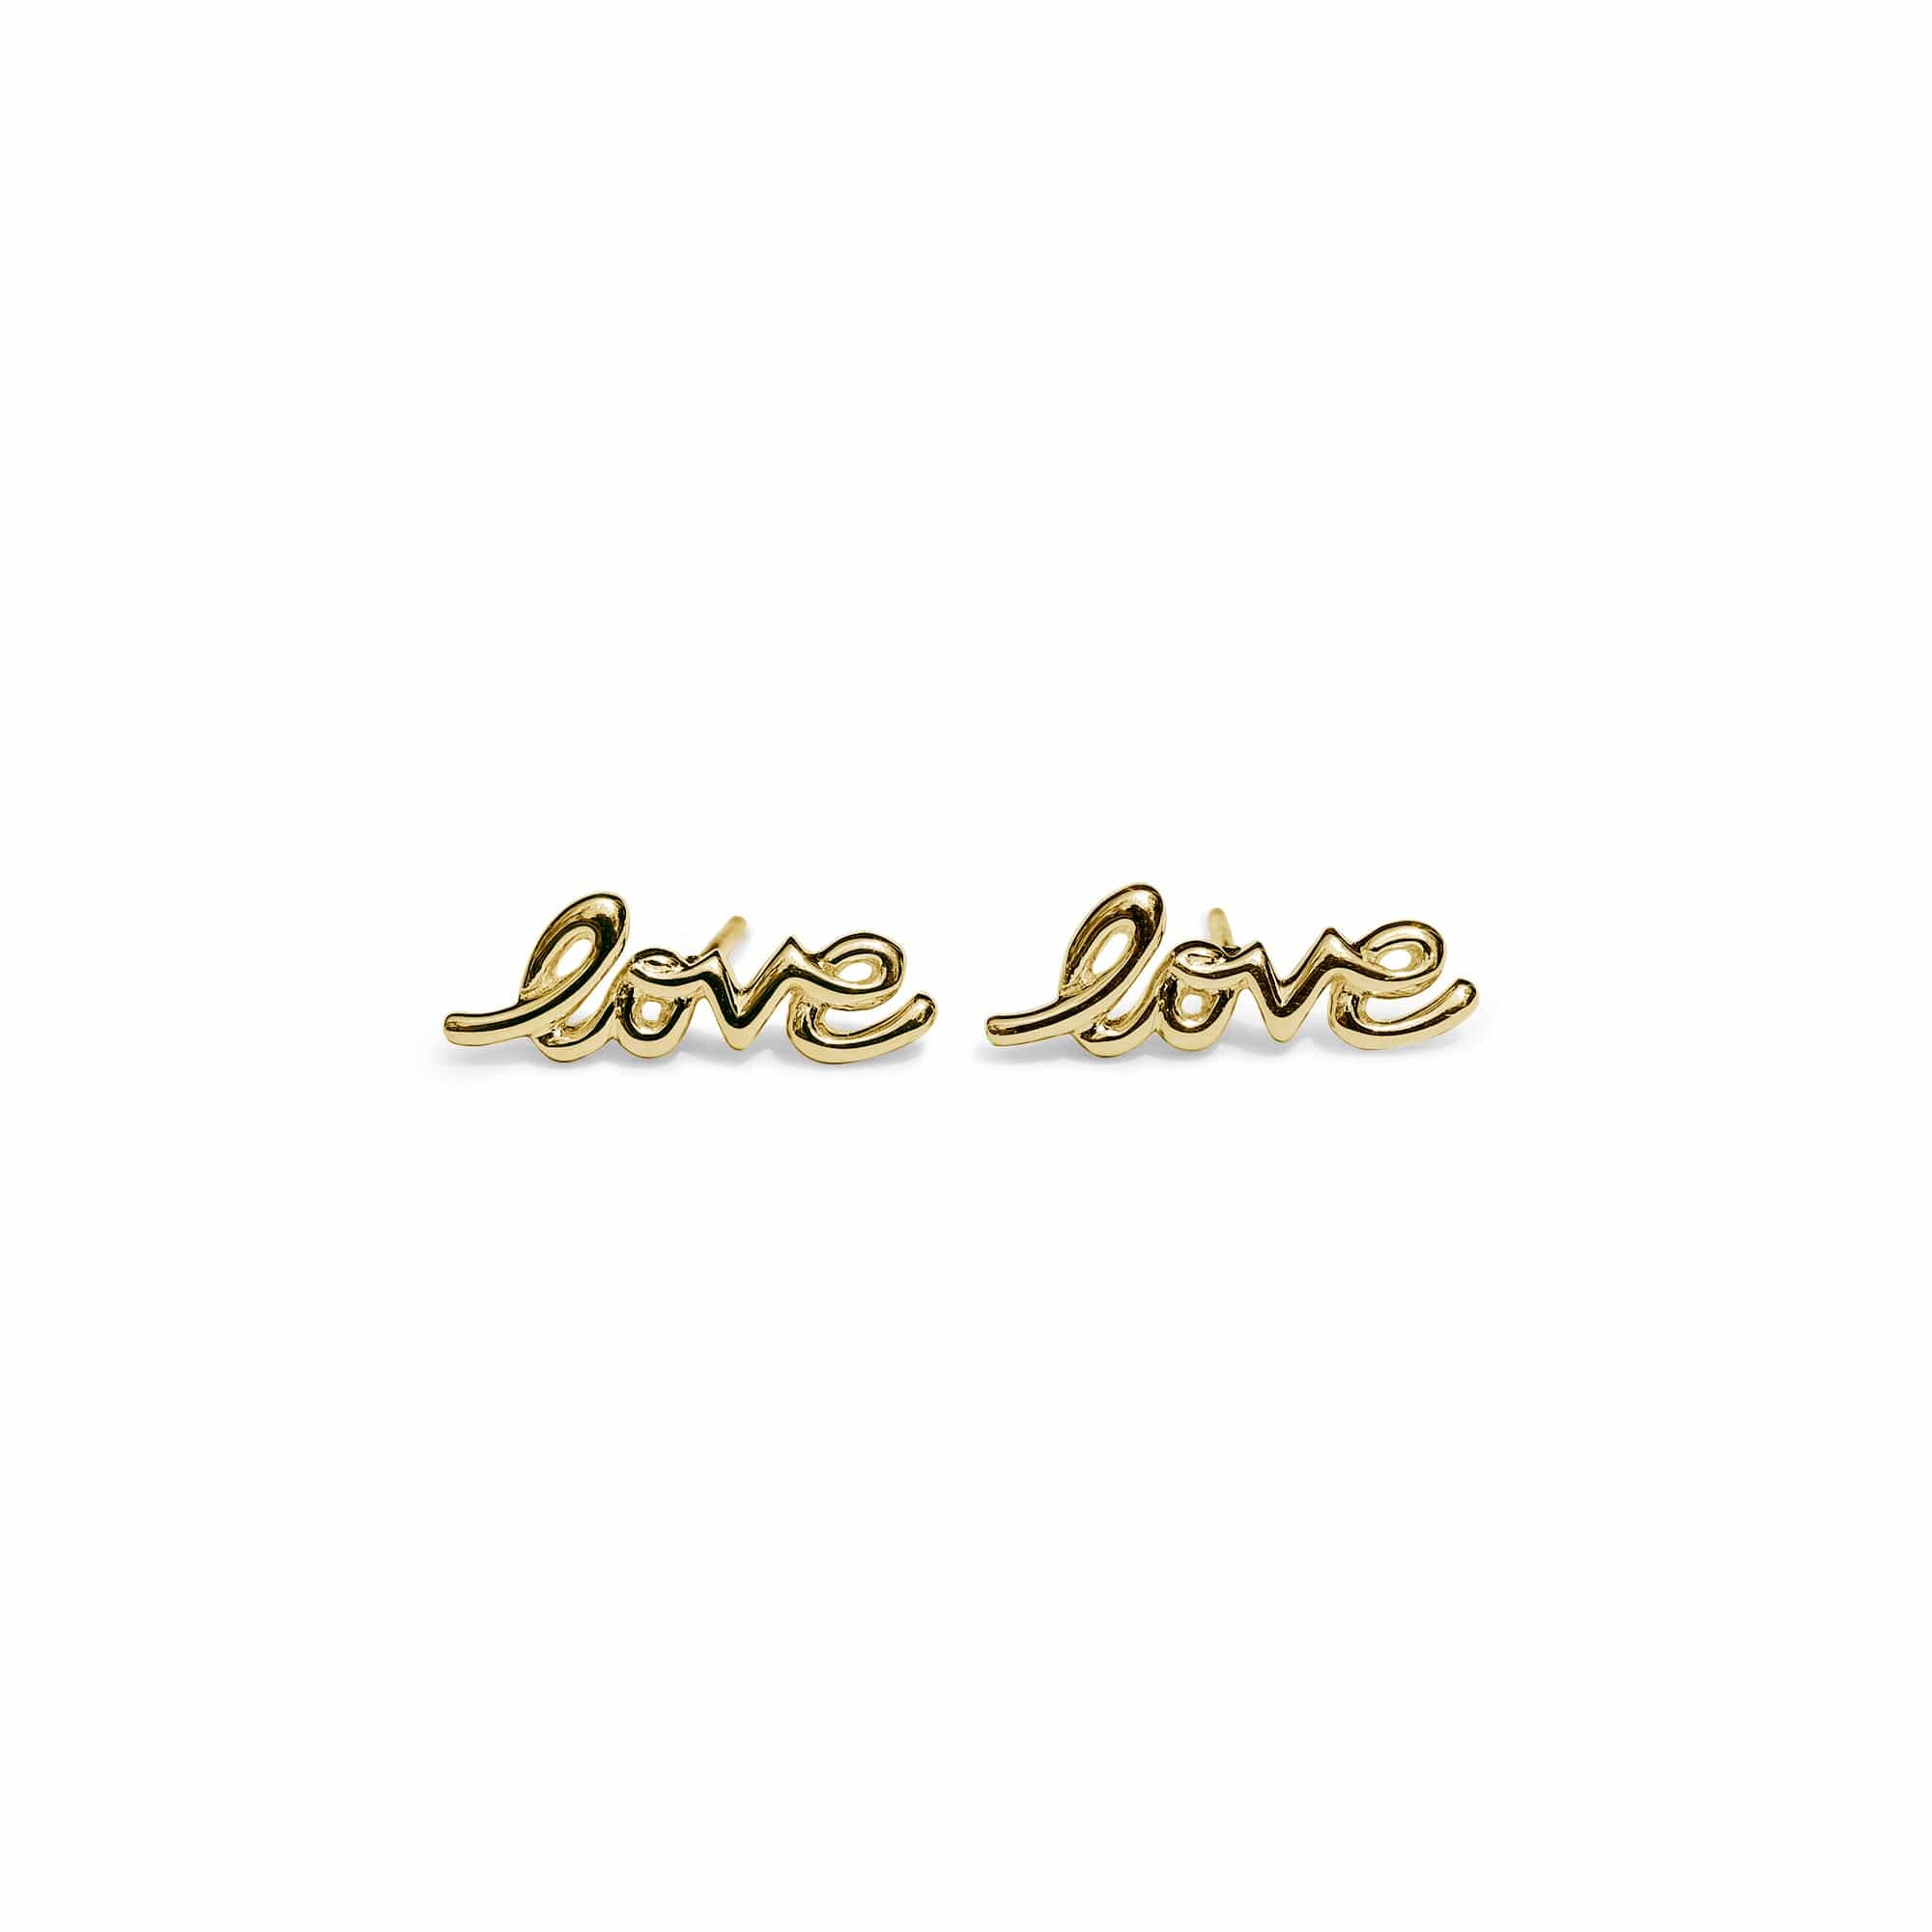 Boma Jewelry Earrings Scripted Love Studs Gold